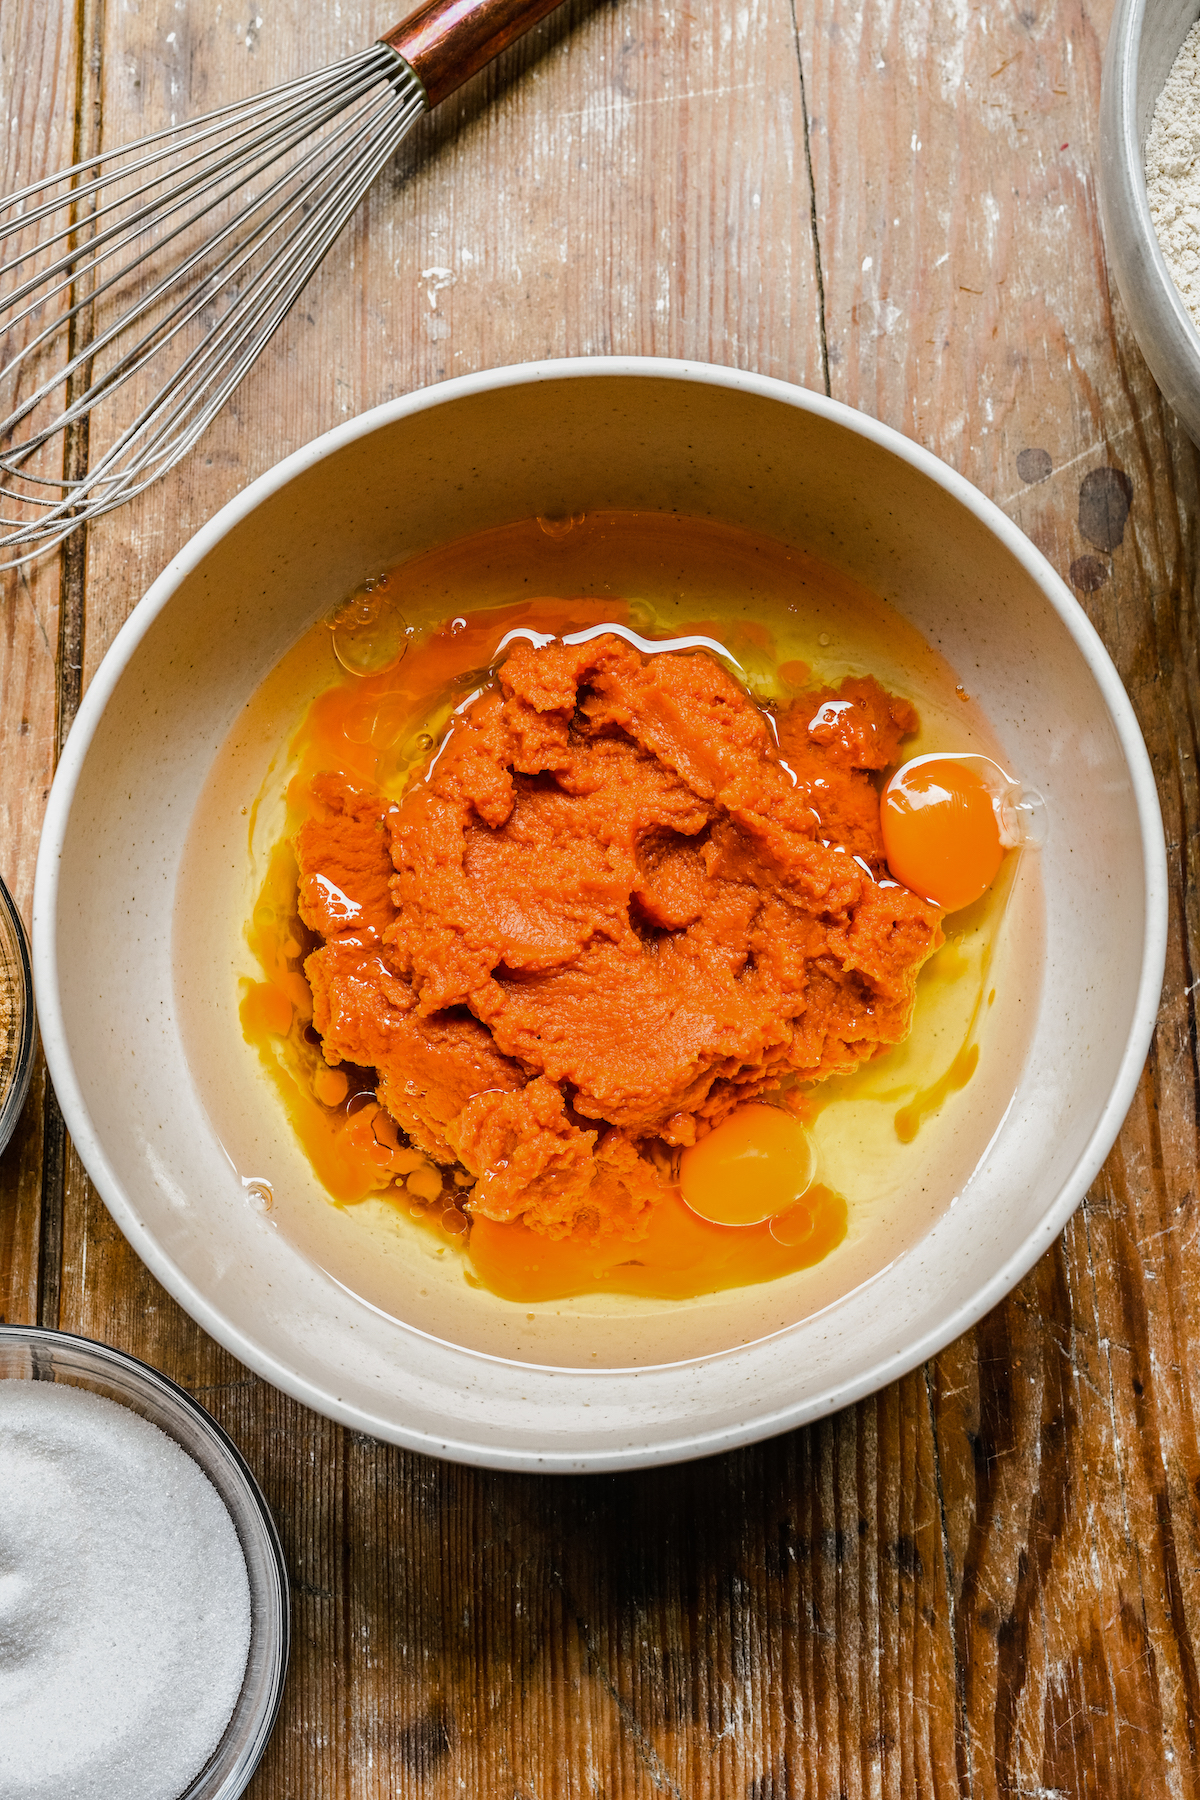 Pumpkin puree, eggs, and other ingredients in a mixing bowl.